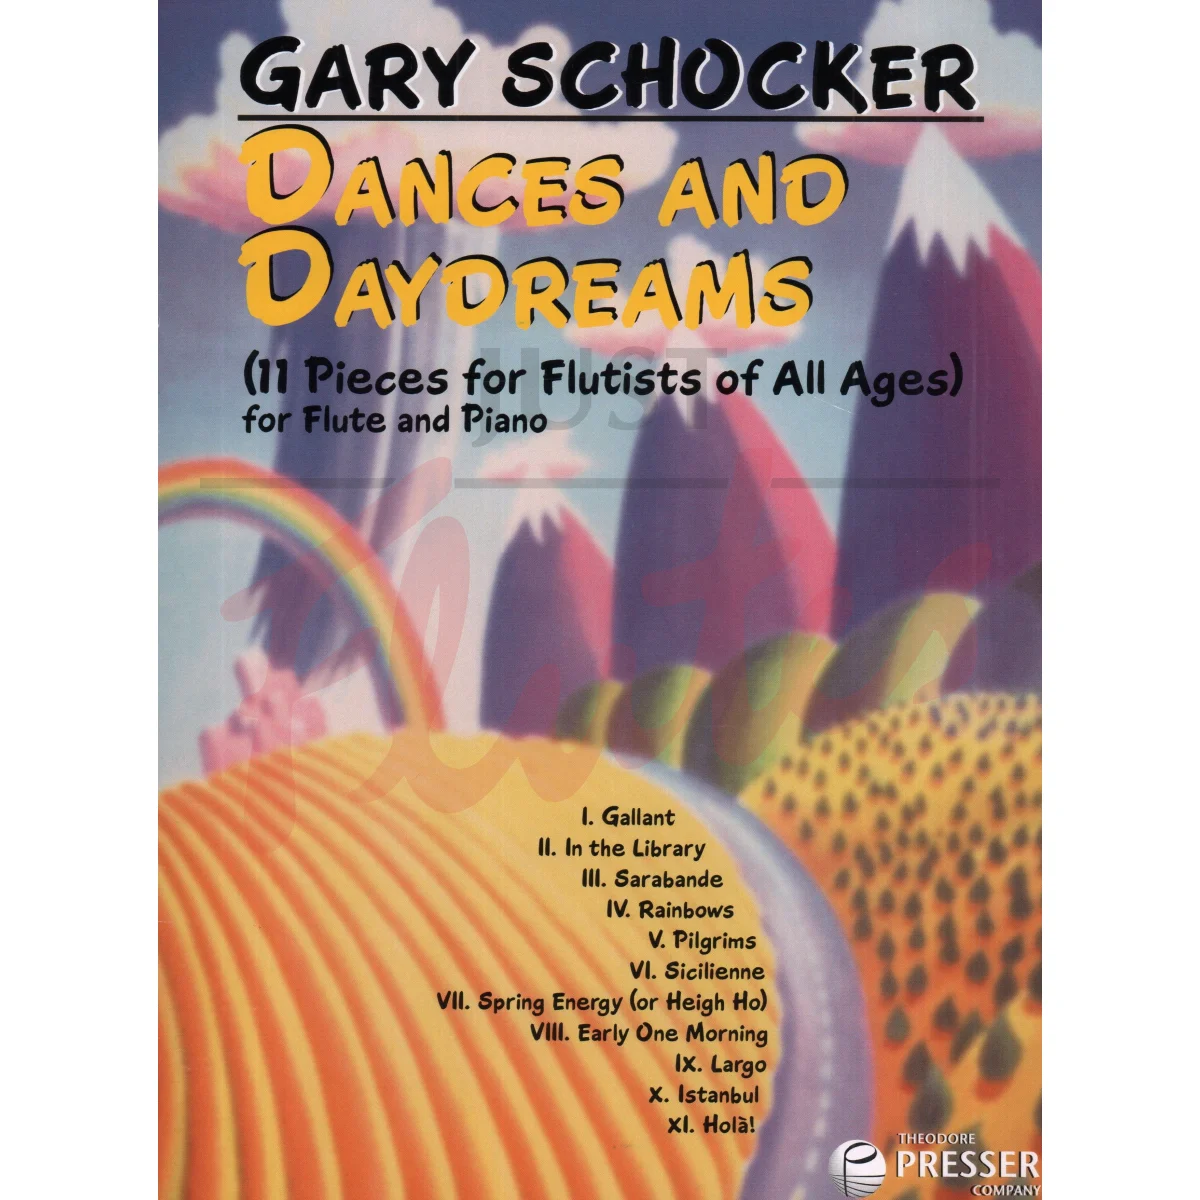 Dances and Daydreams for Flute and Piano